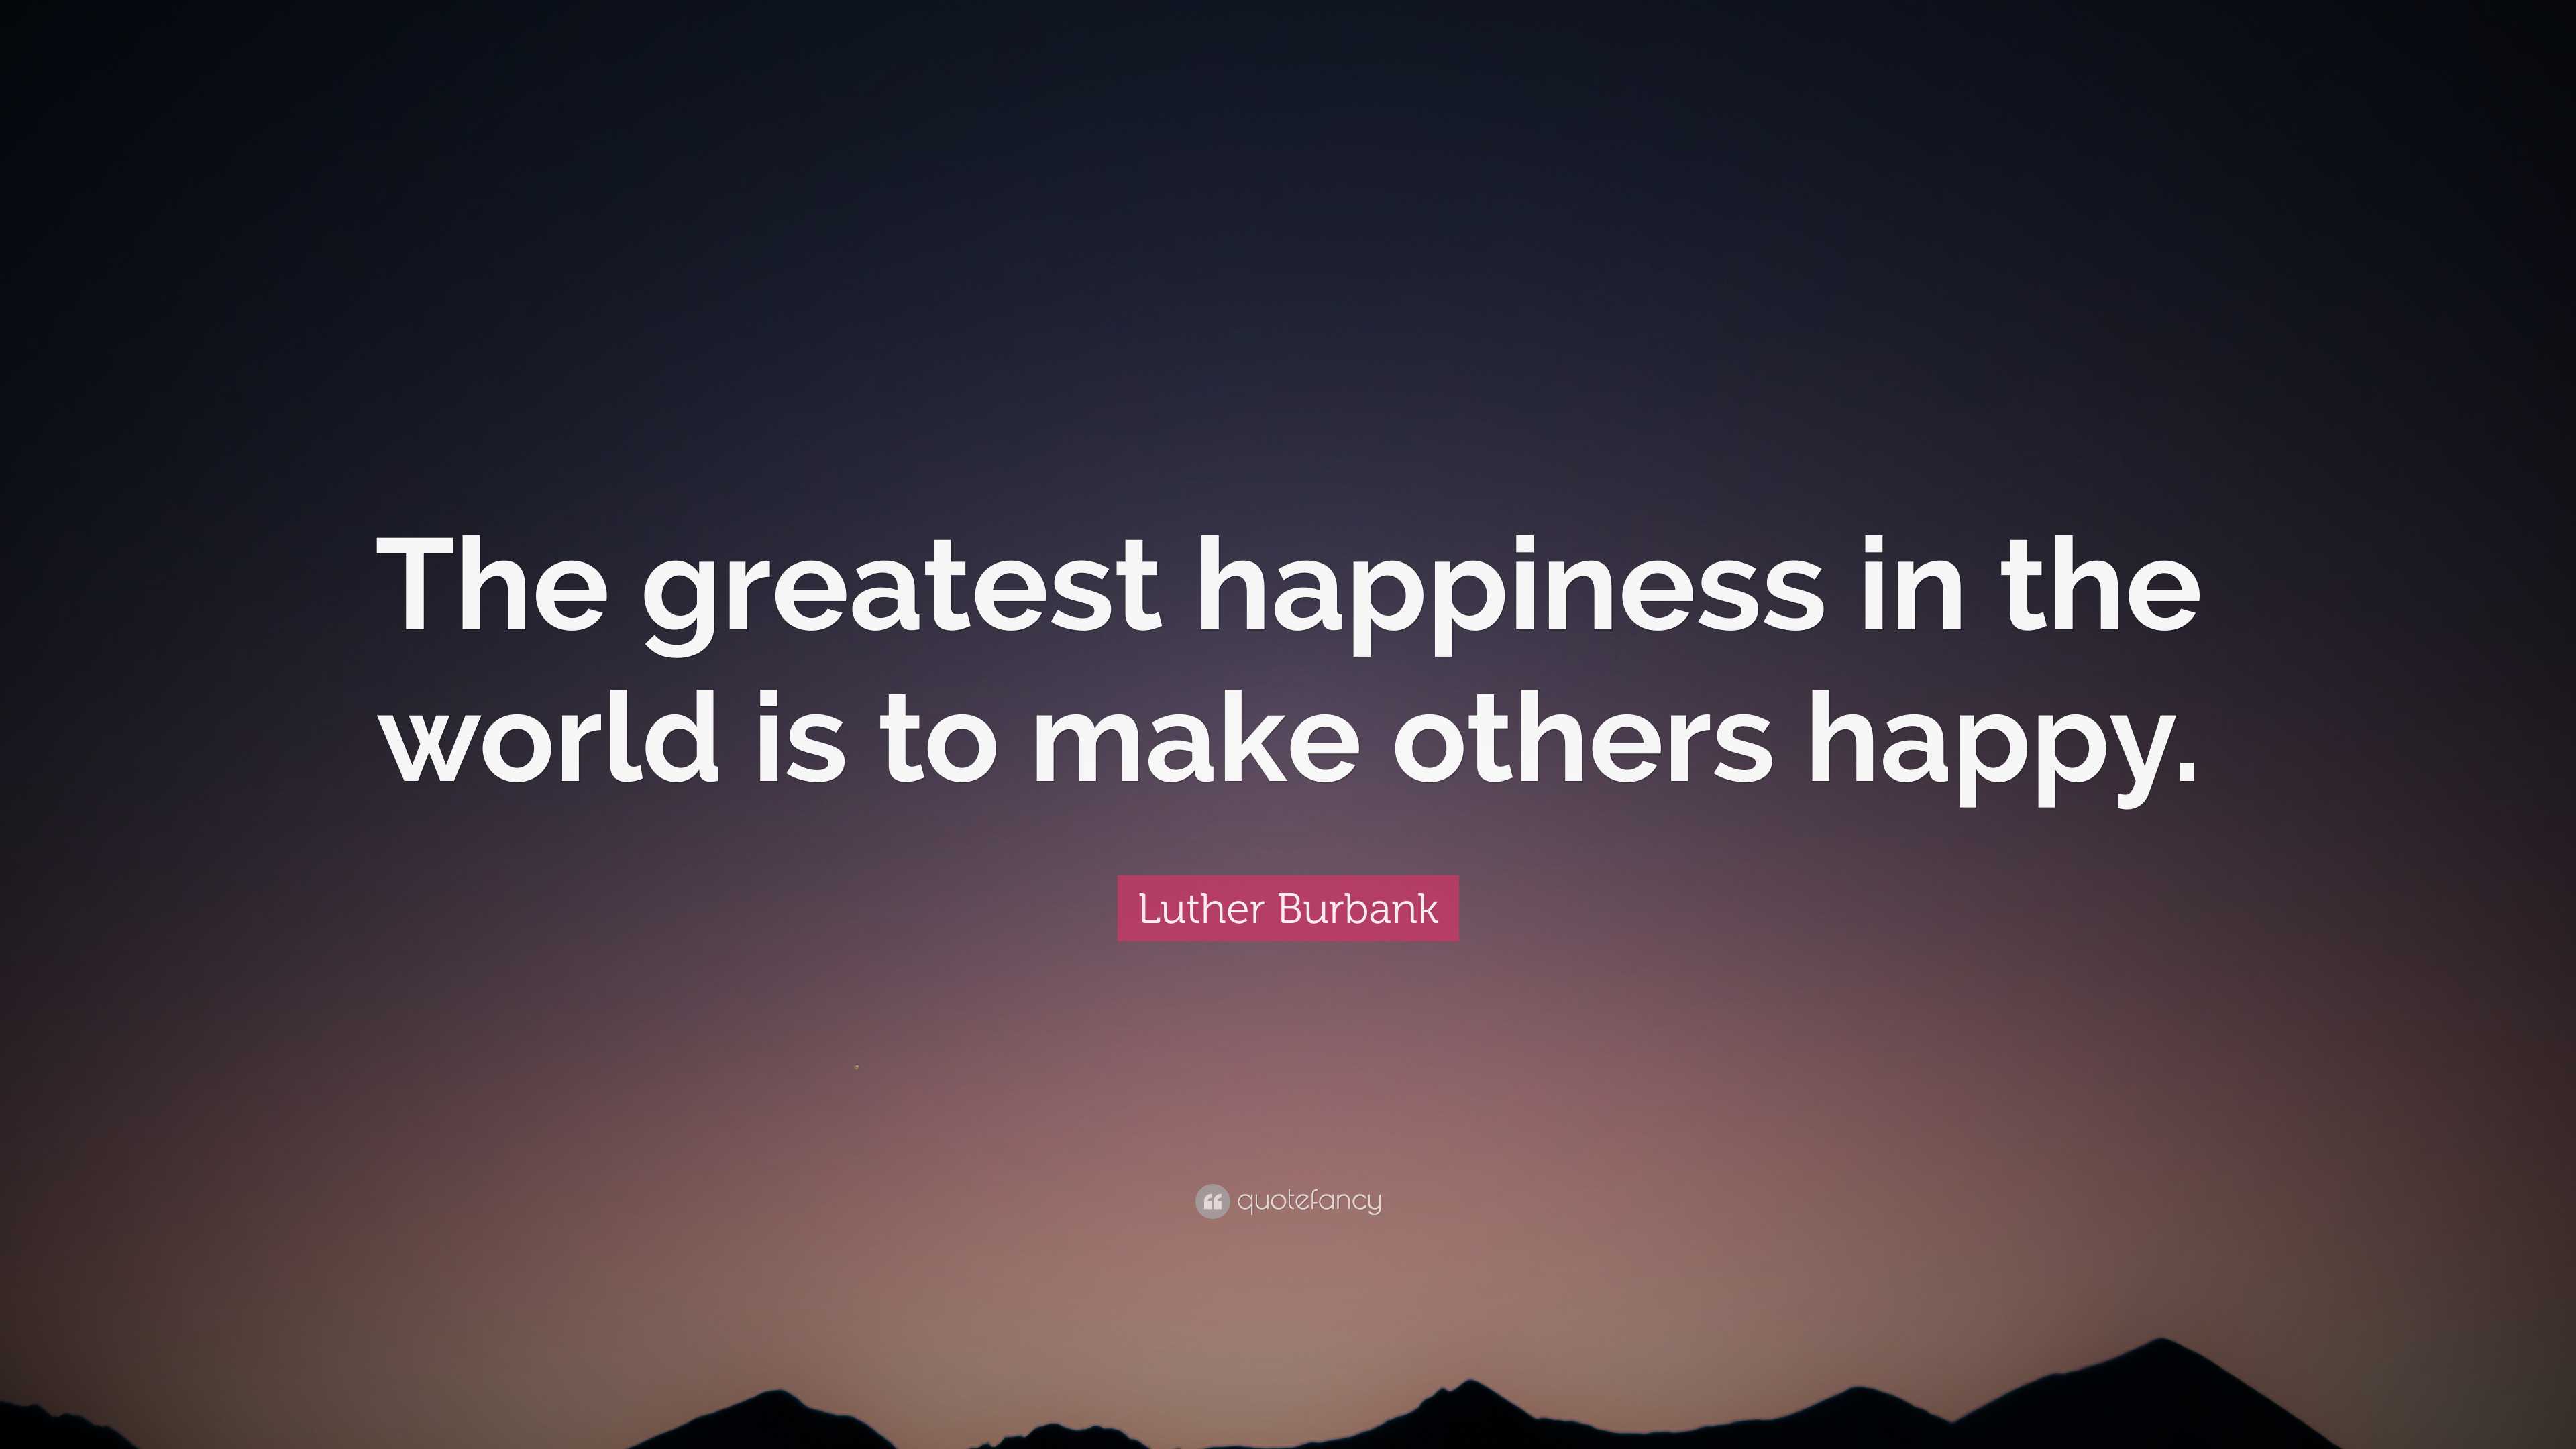 Luther Burbank Quote: “The greatest happiness in the world is to make  others happy.”